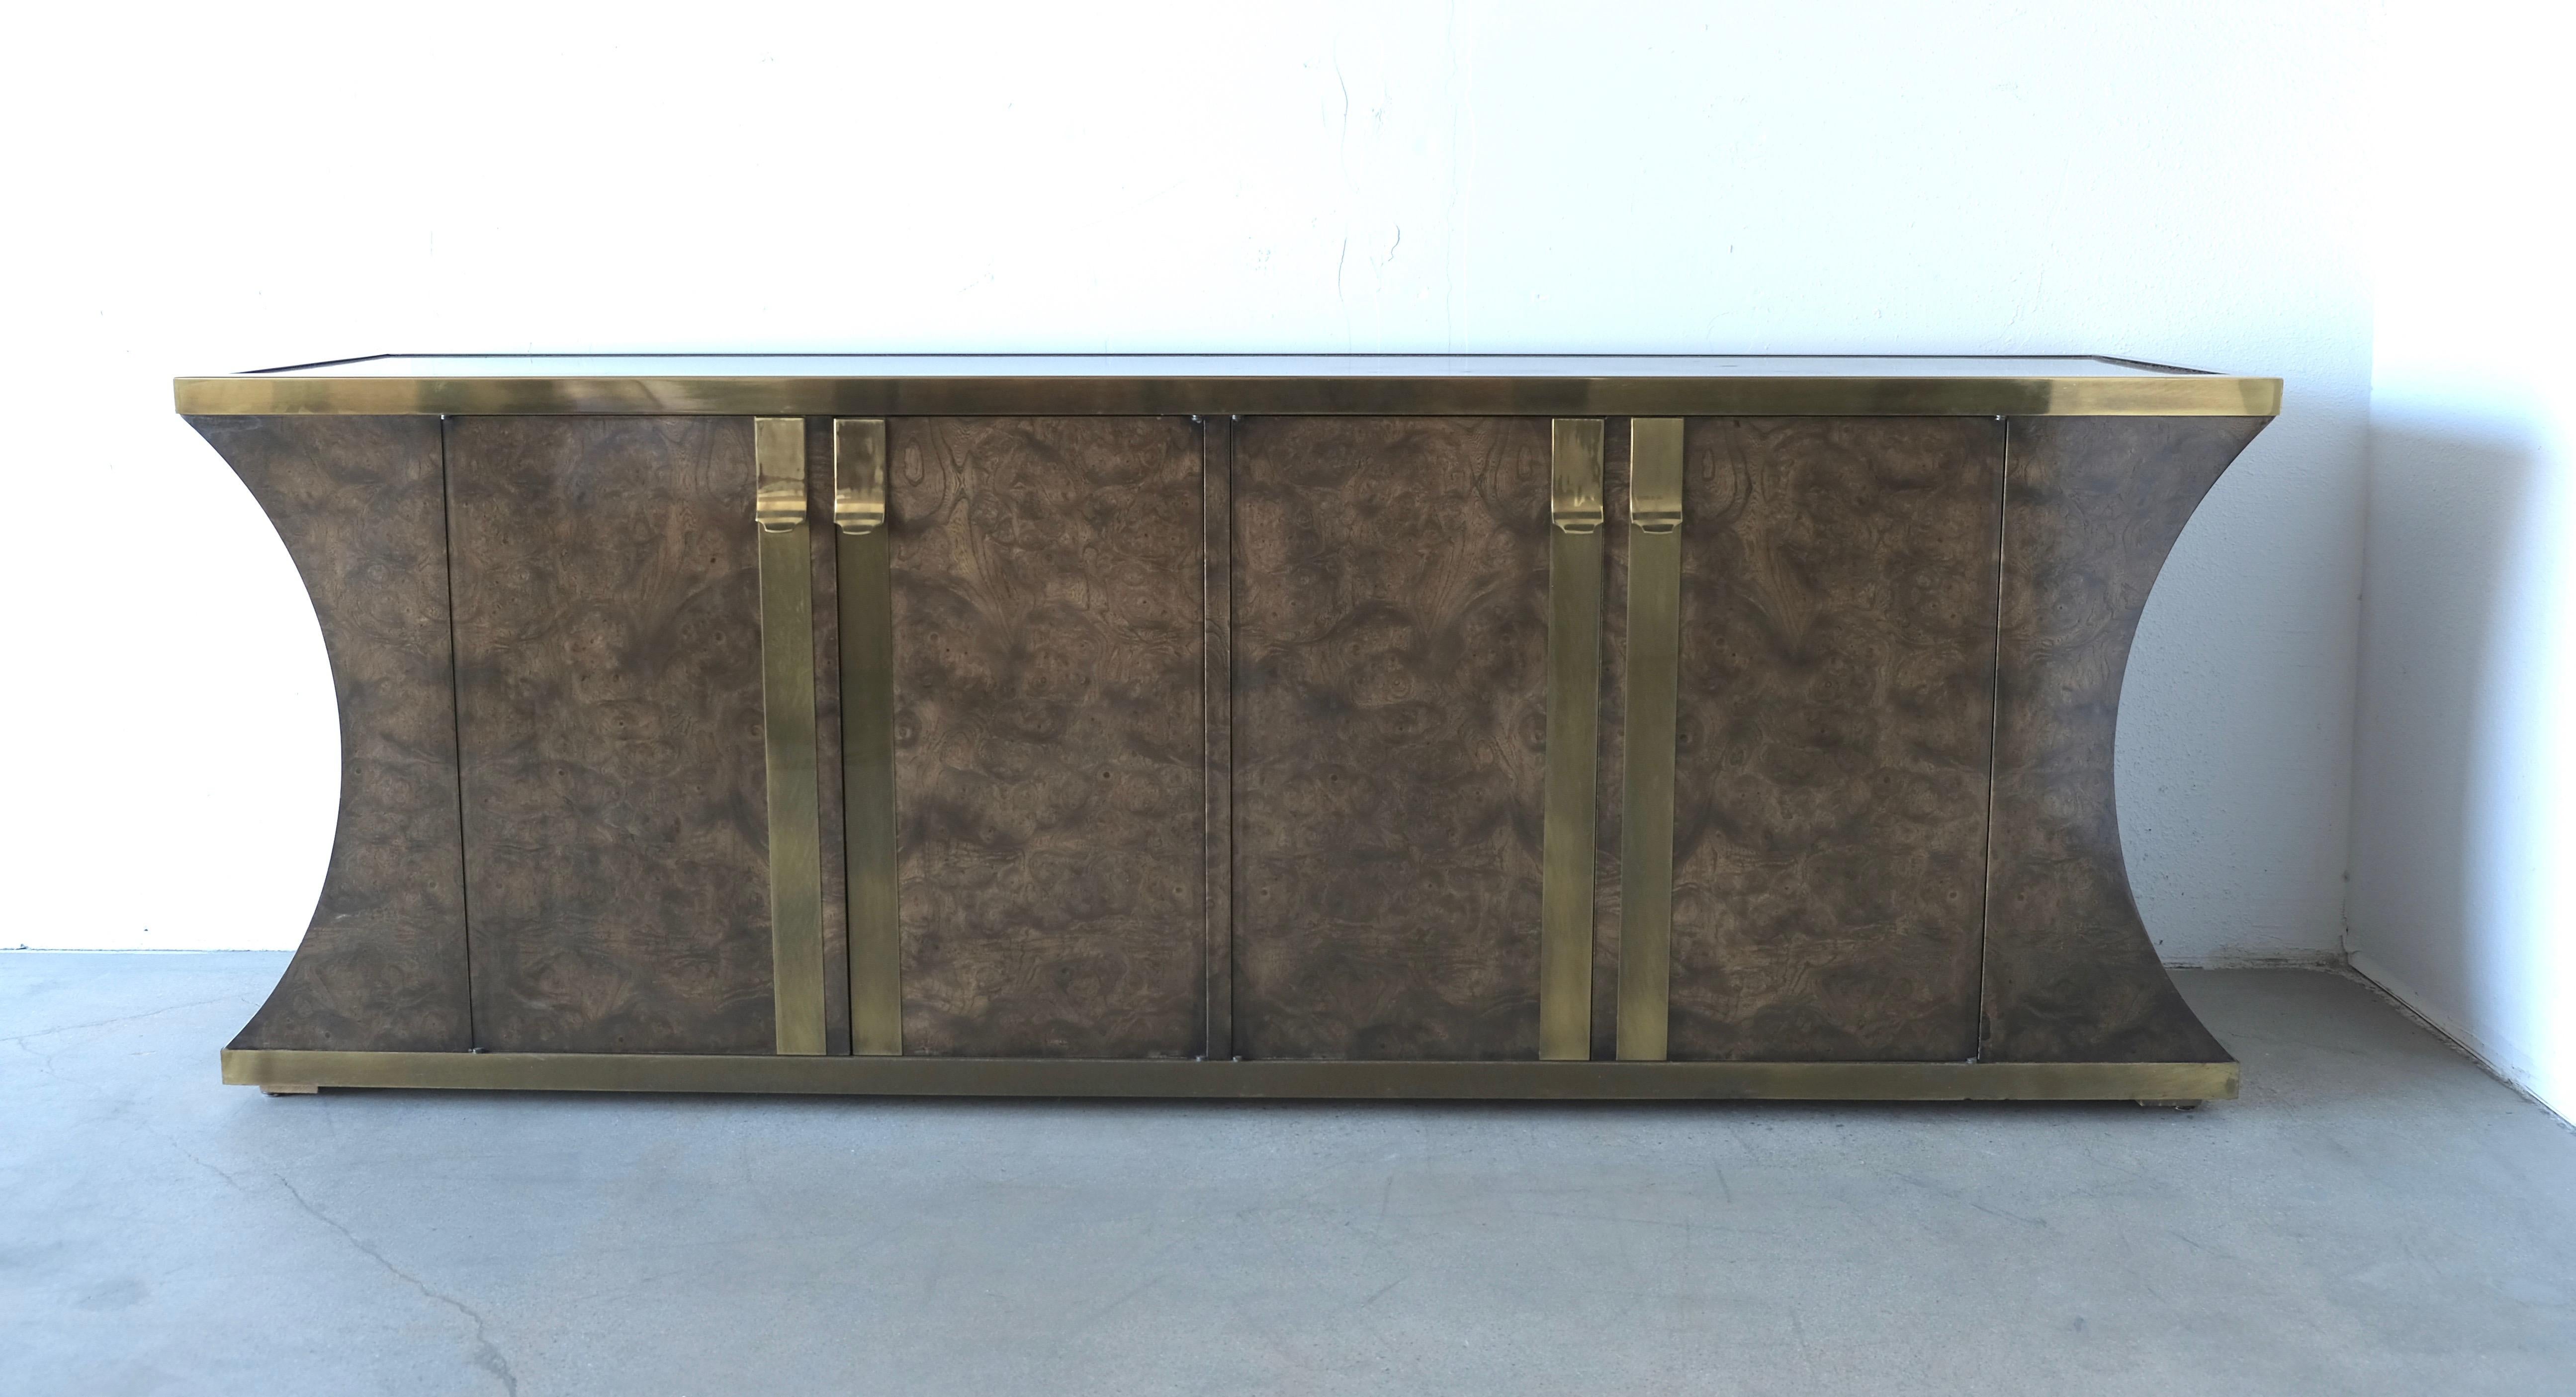 Beautifully figured burl on this Mastercraft credenza from the 1970s.
The aged brass which trims the top and base has a pleasing patina to it.
The brass hardware is a nice contrast to the burl wood. There are two sets of doors. The right pair